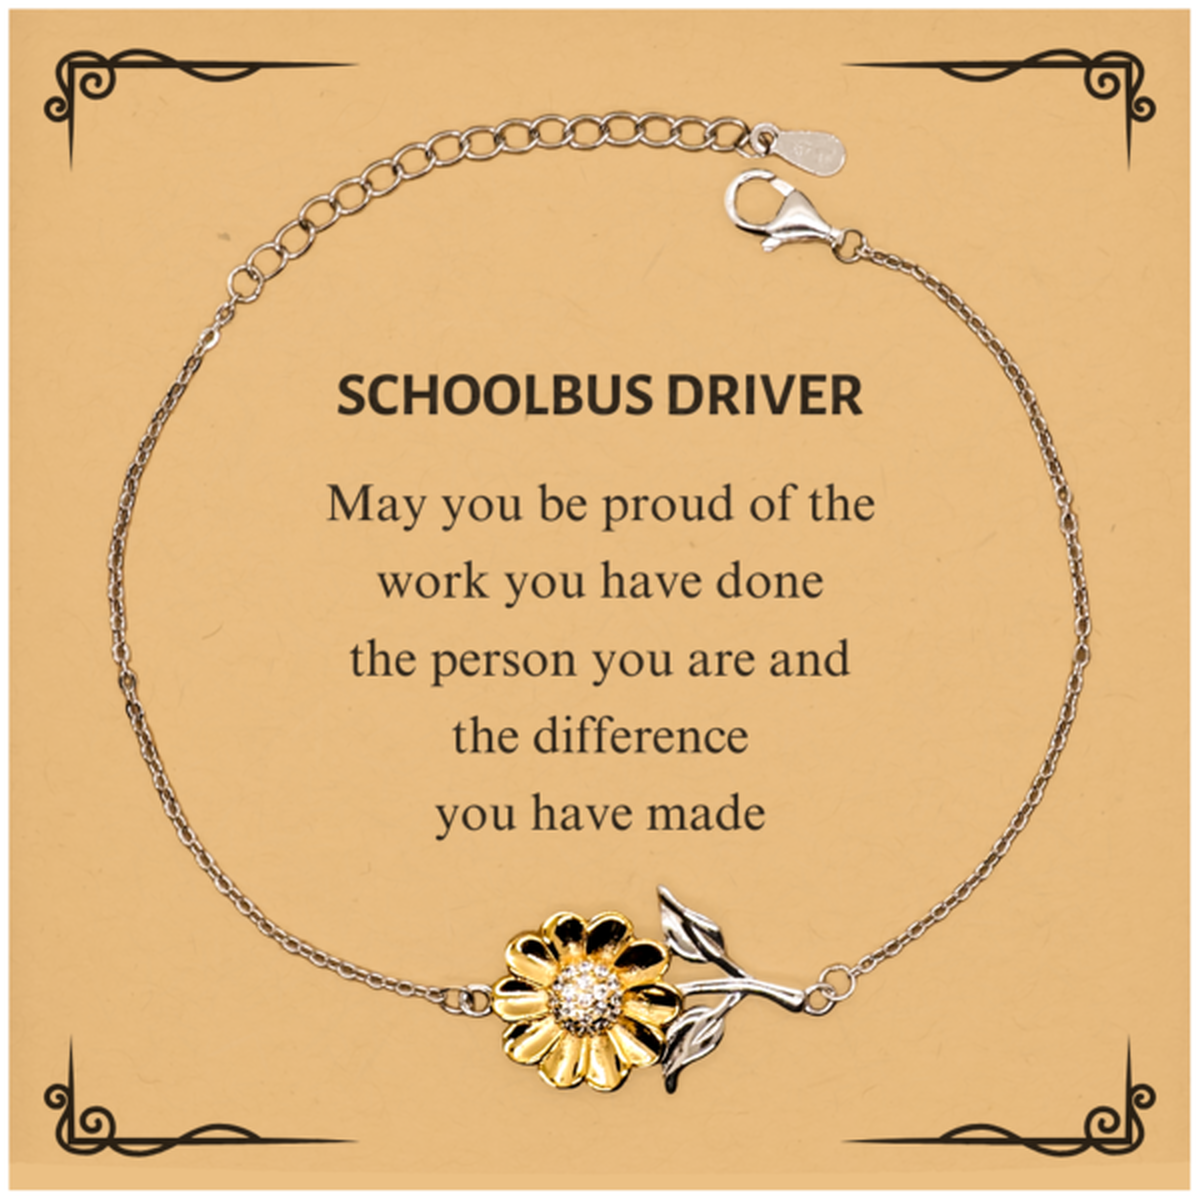 Schoolbus Driver May you be proud of the work you have done, Retirement Schoolbus Driver Sunflower Bracelet for Colleague Appreciation Gifts Amazing for Schoolbus Driver